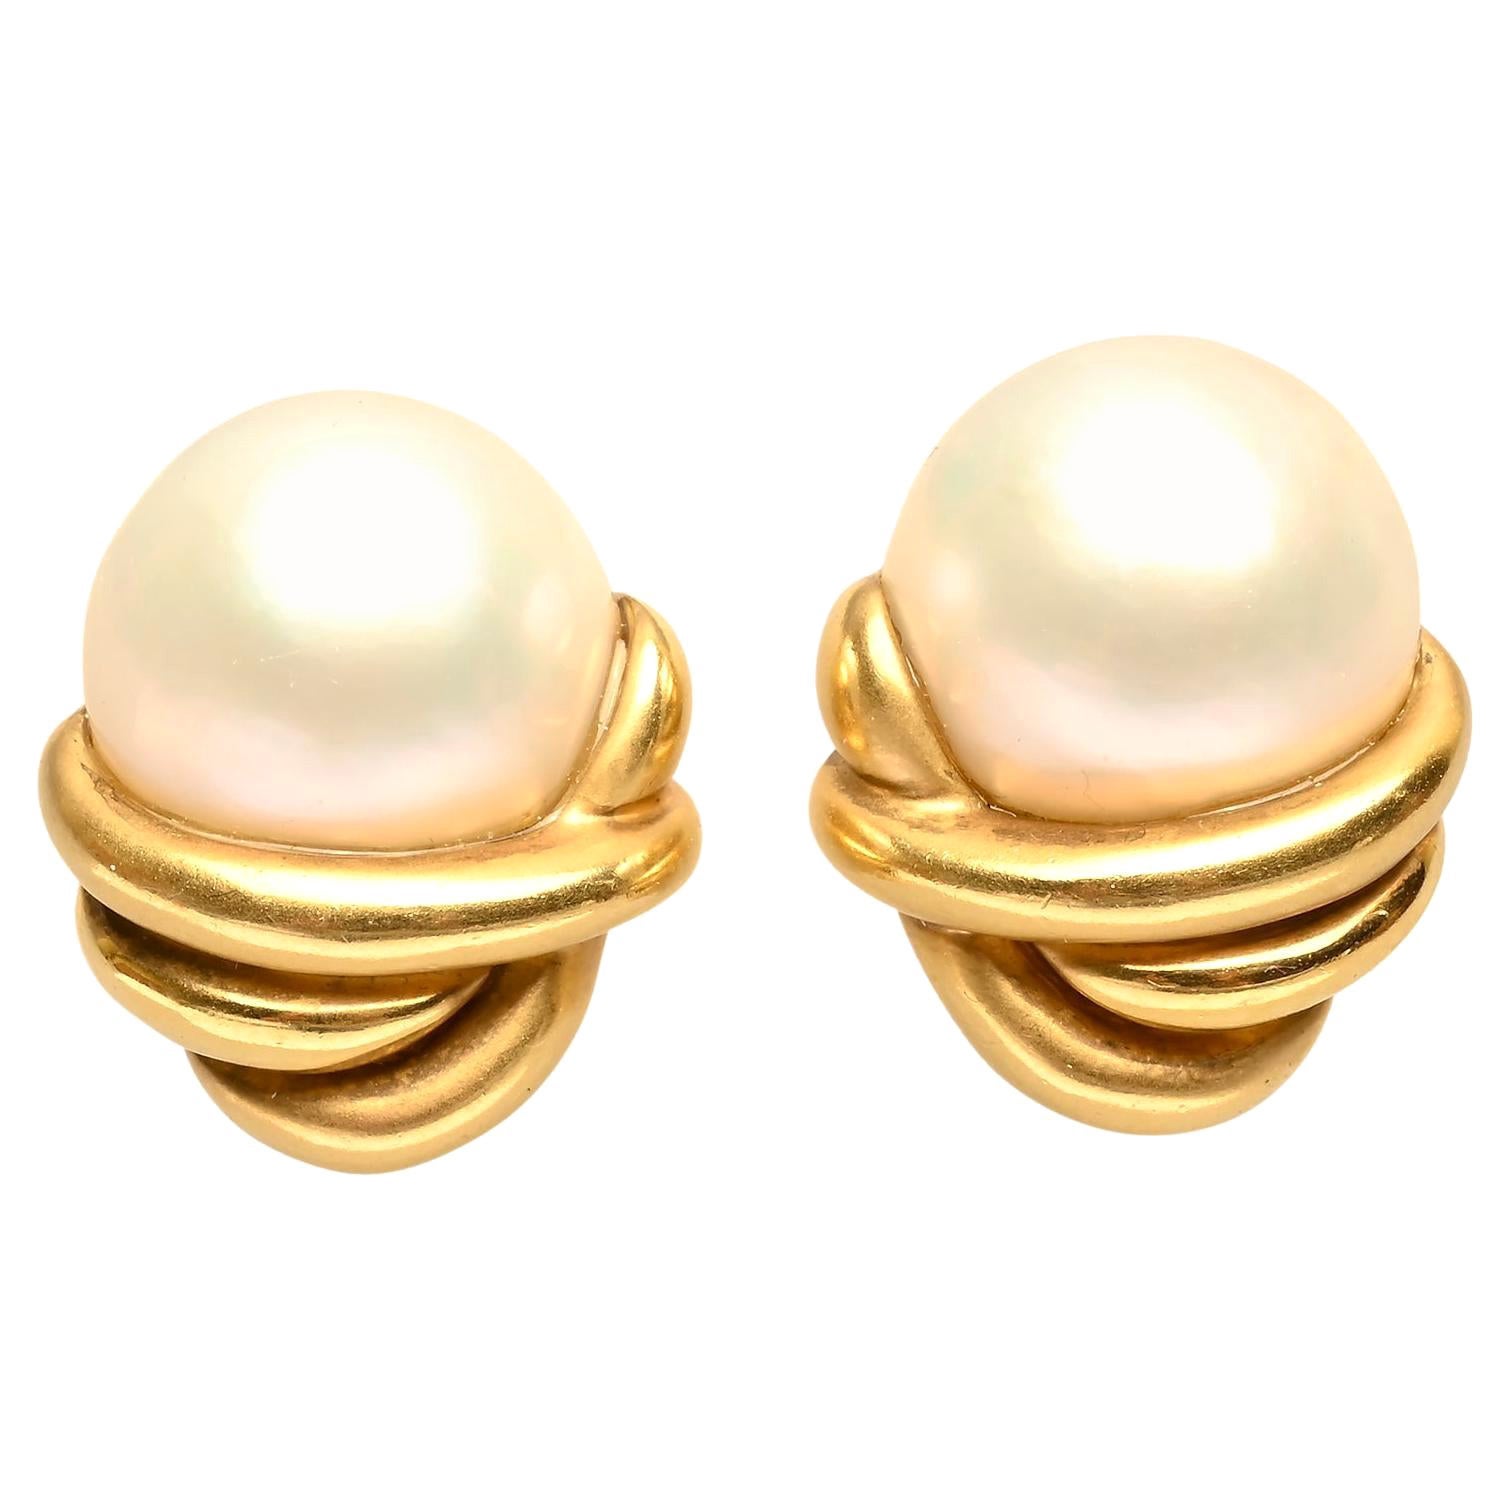 Marlene Stowe Pearl and Gold Earrings For Sale